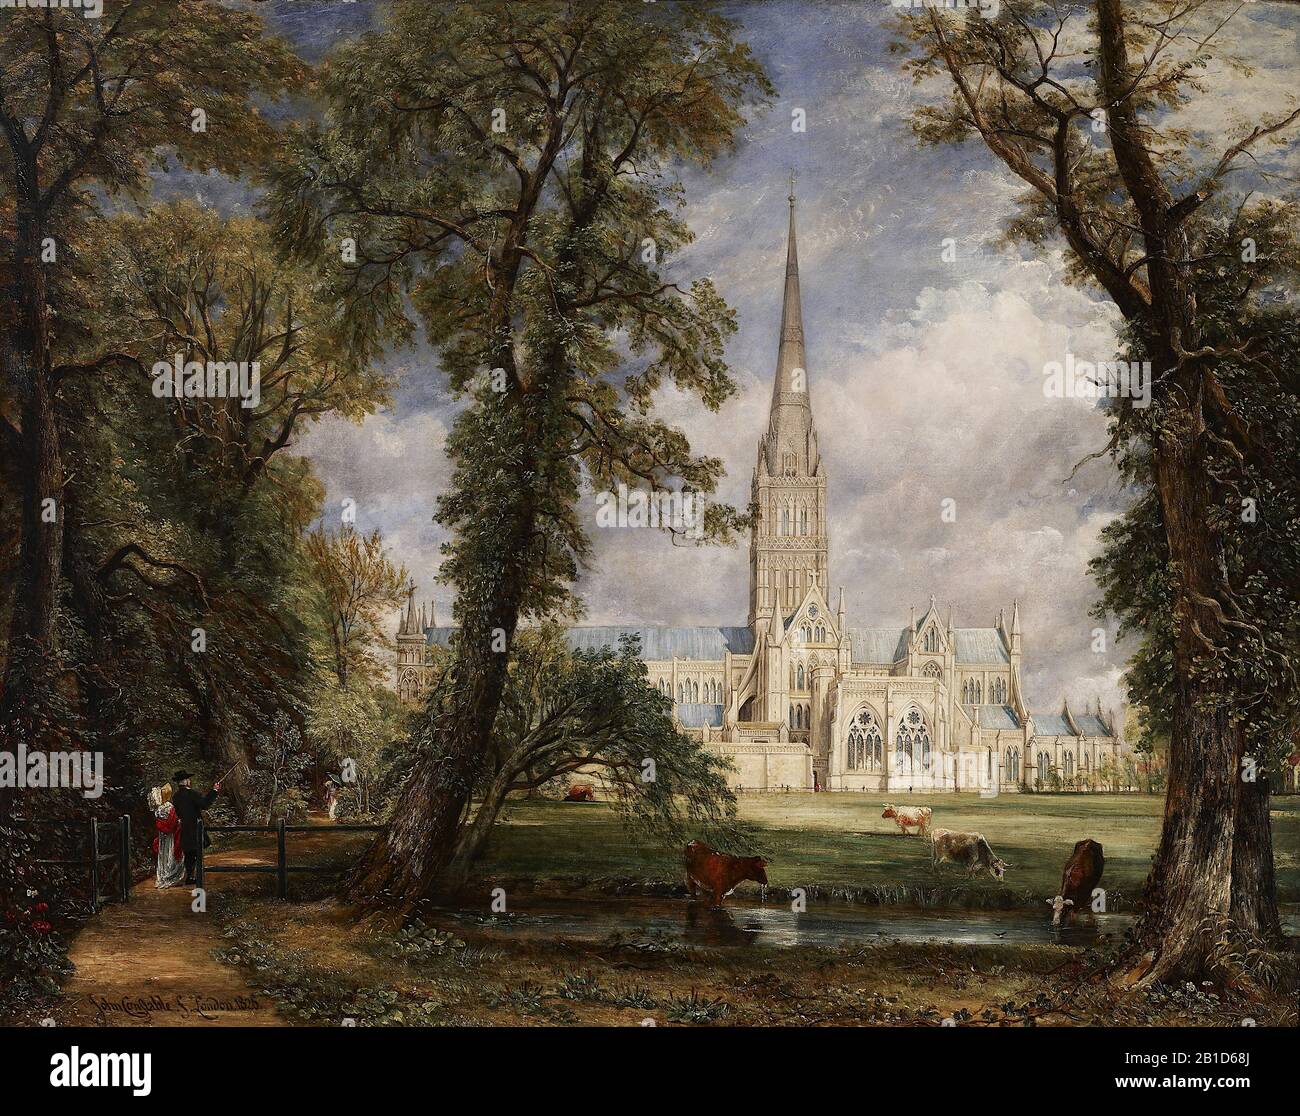 Salisbury Cathedral from the Bishop's Garden (1826) 19th Century Painting by John Constable - Very high resolution and quality image Stock Photo